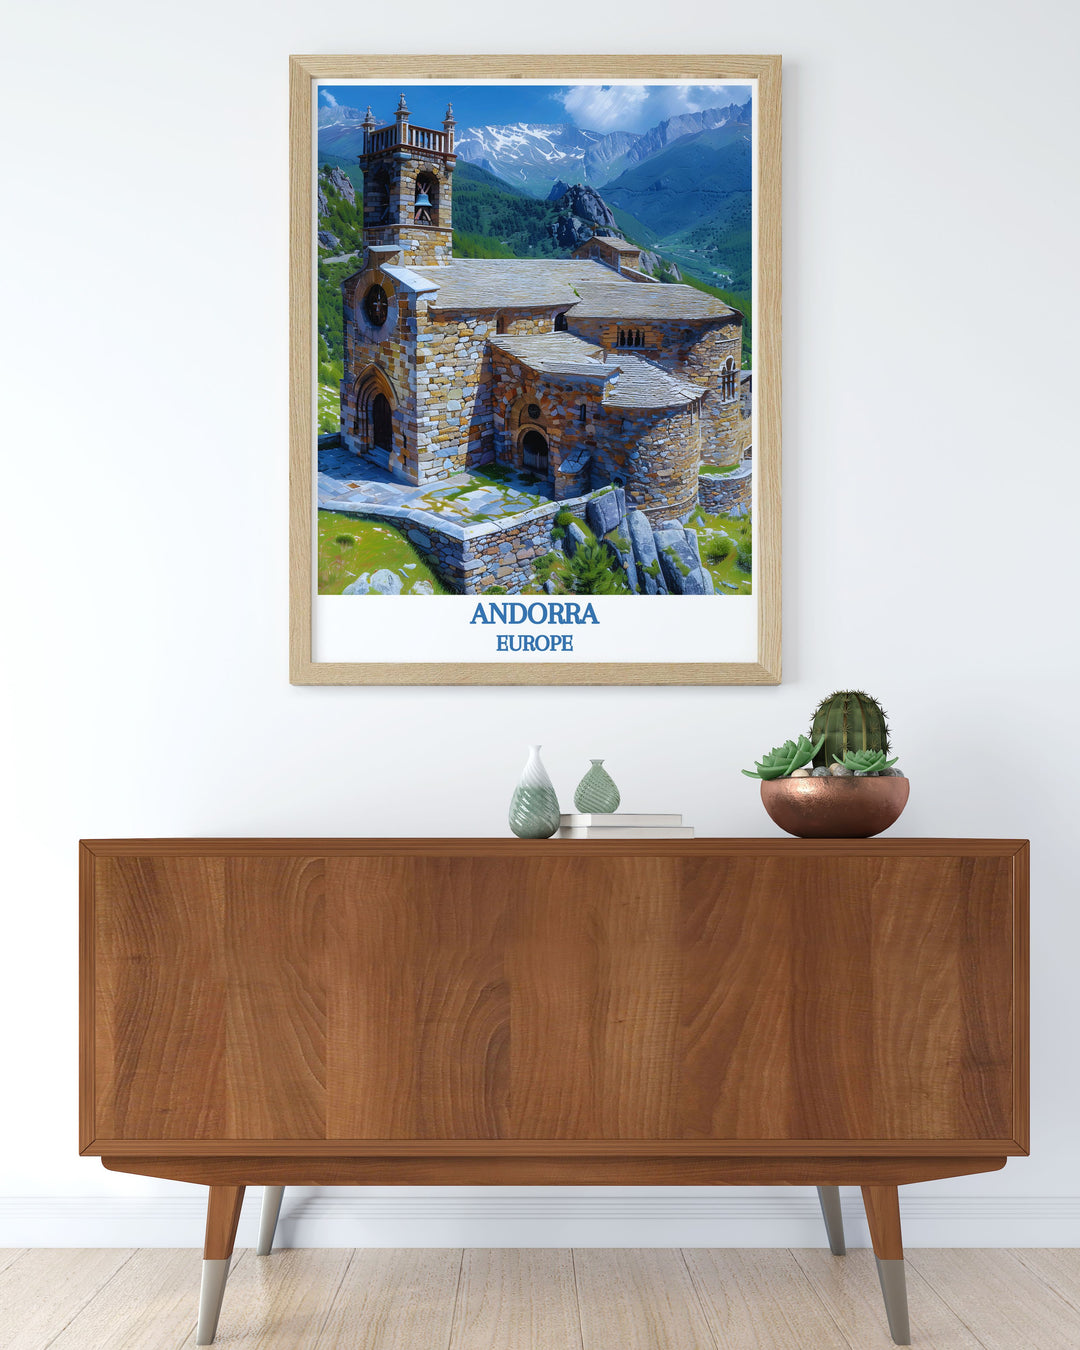 Travel poster highlighting the attractions of Andorra, including the famous Sant Joan de Caselles Church amidst snowy peaks.